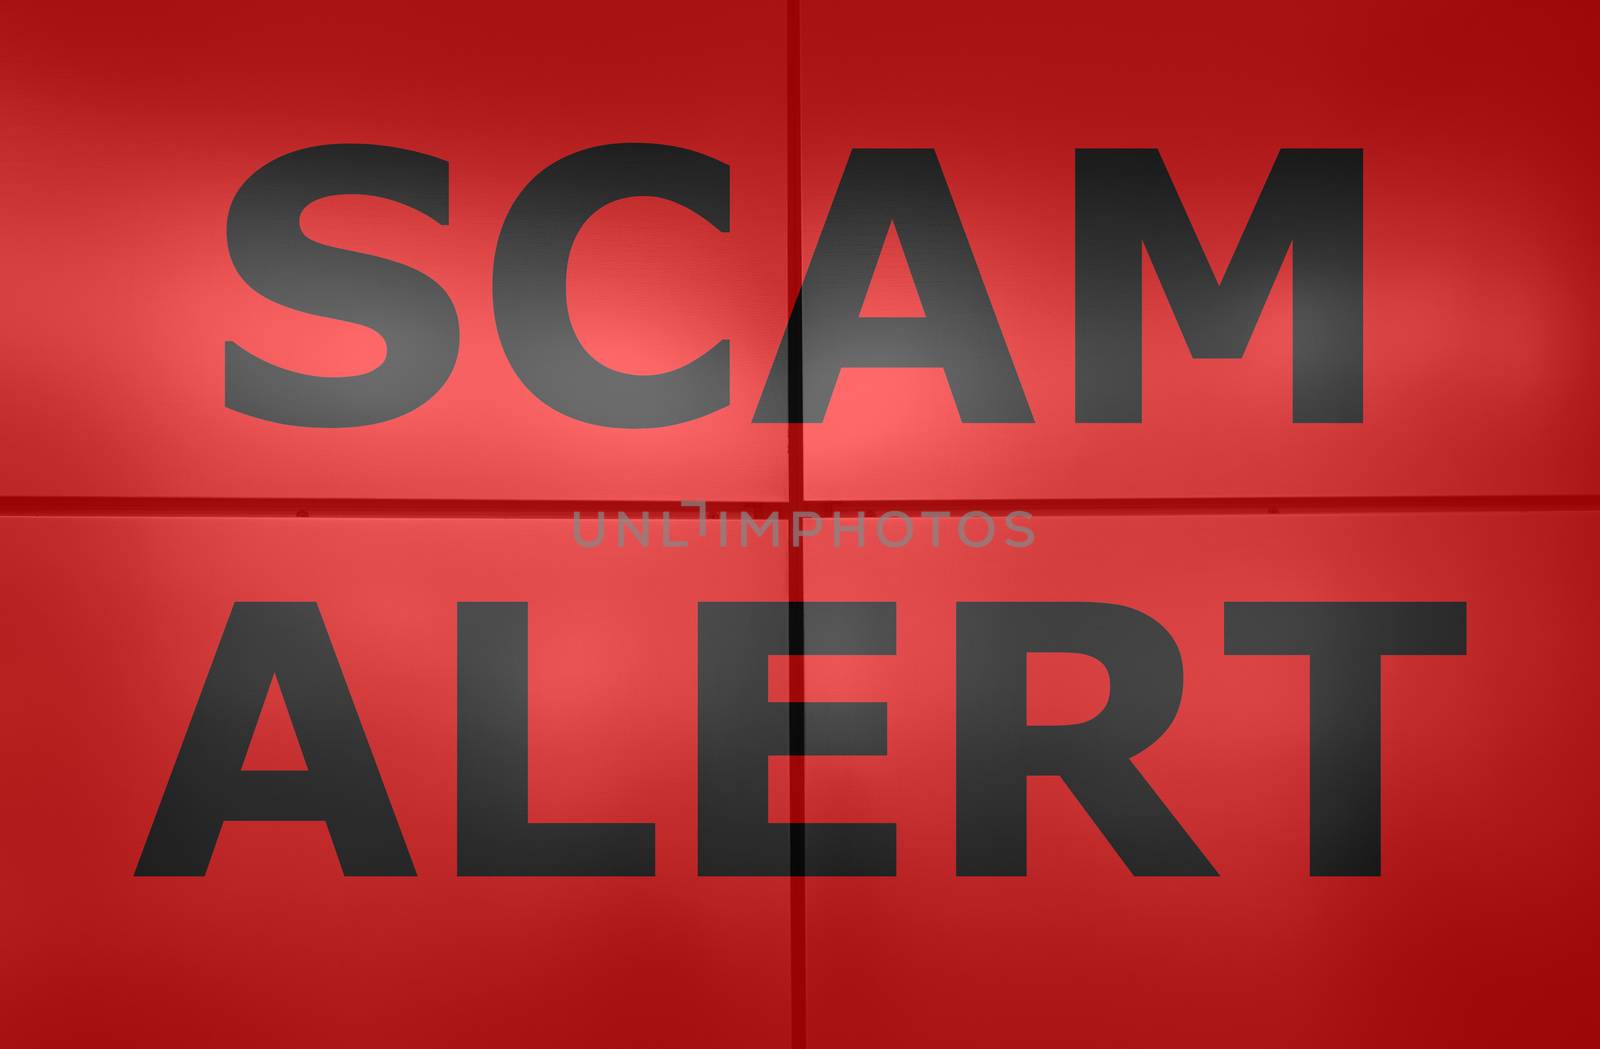 Scam alert text on red background. by szefei